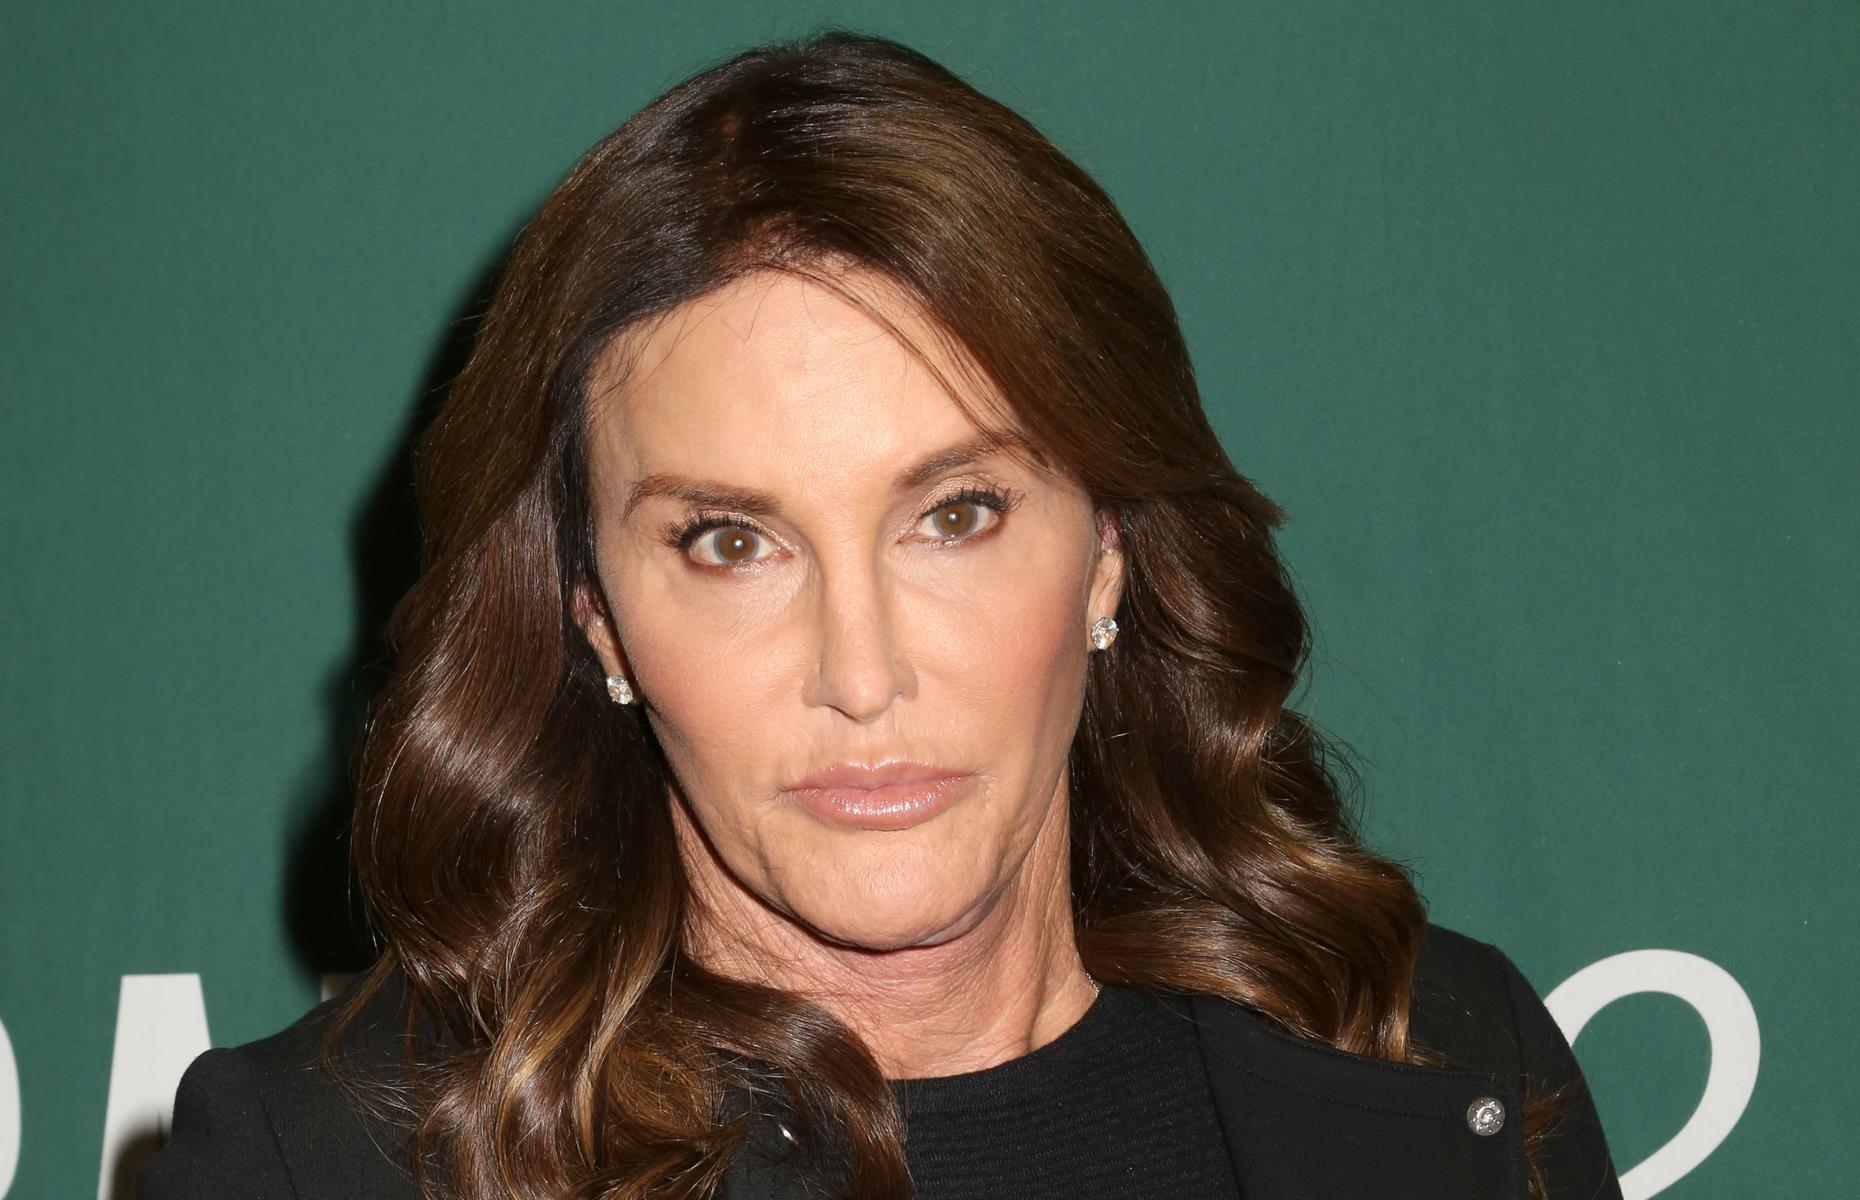 Caityn Jenner was an Olympic athlete